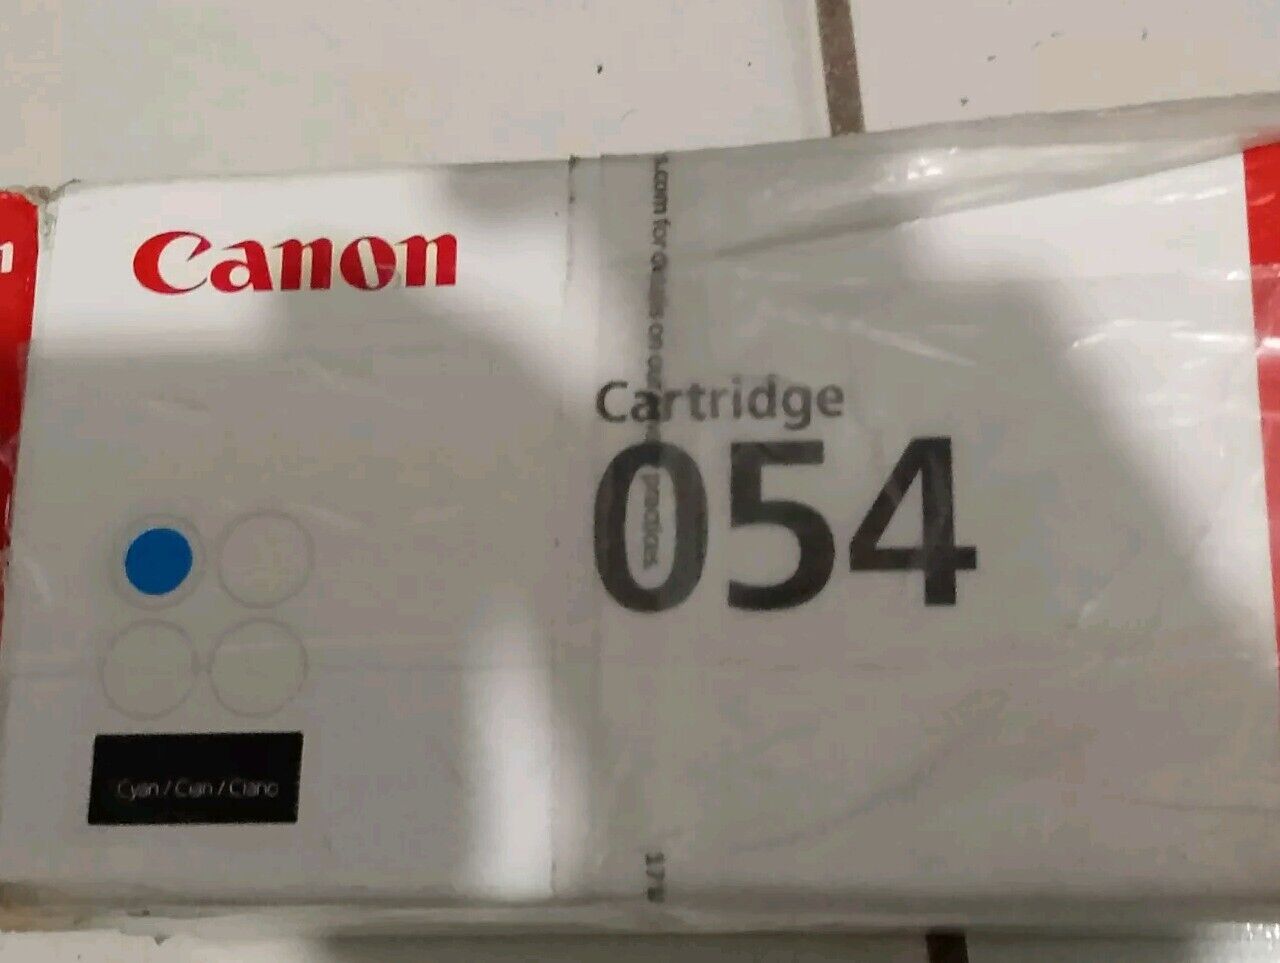 Official Genuine Canon 054 Toner Cartridge Cyan for LBP620C Series